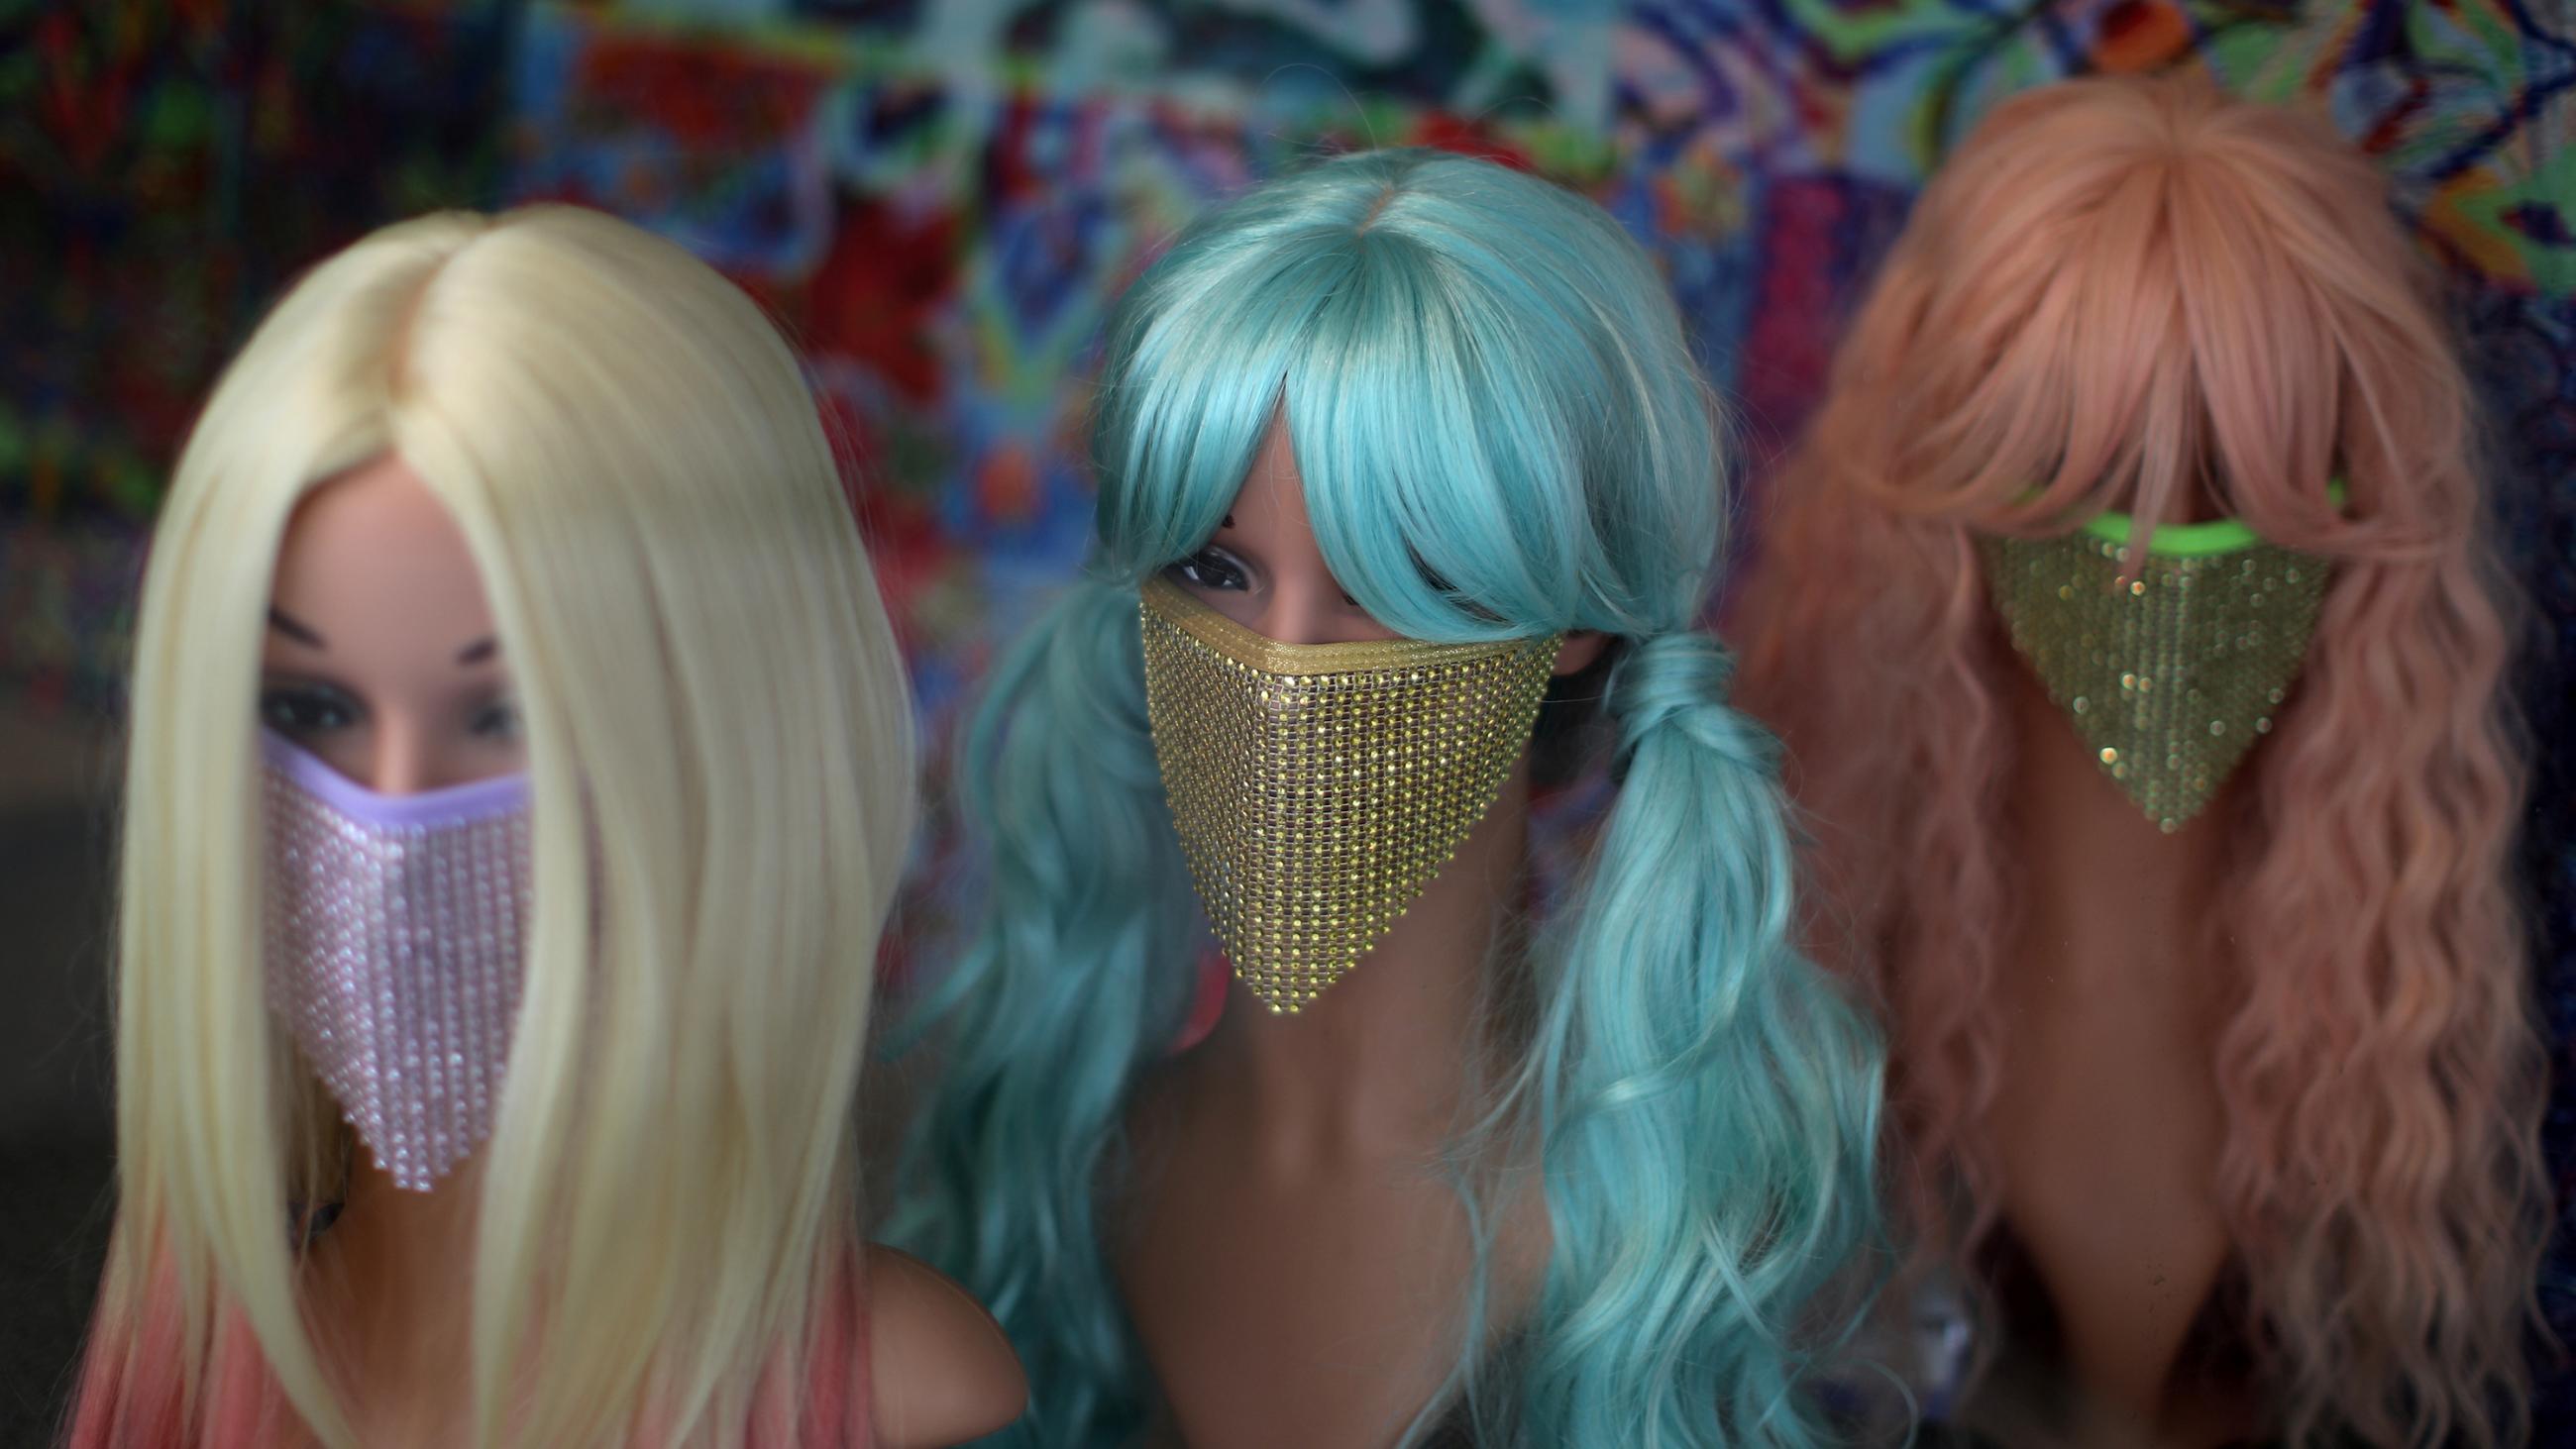 The photo shows three mannequin heads, each with a colorful wig as well as a colorful, sequined mask. 